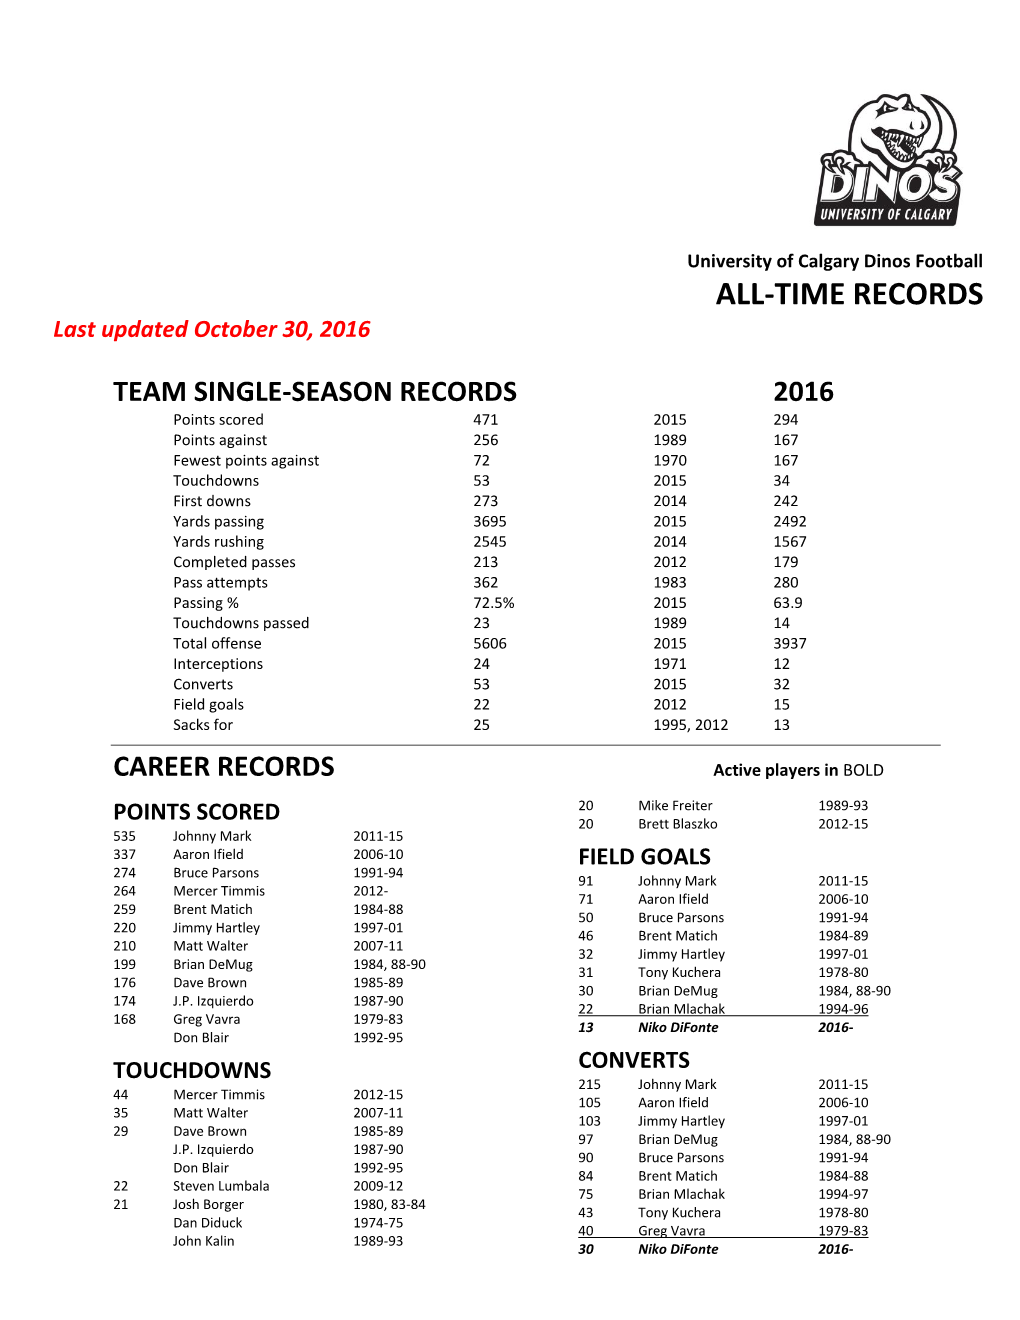 ALL-TIME RECORDS Last Updated October 30, 2016